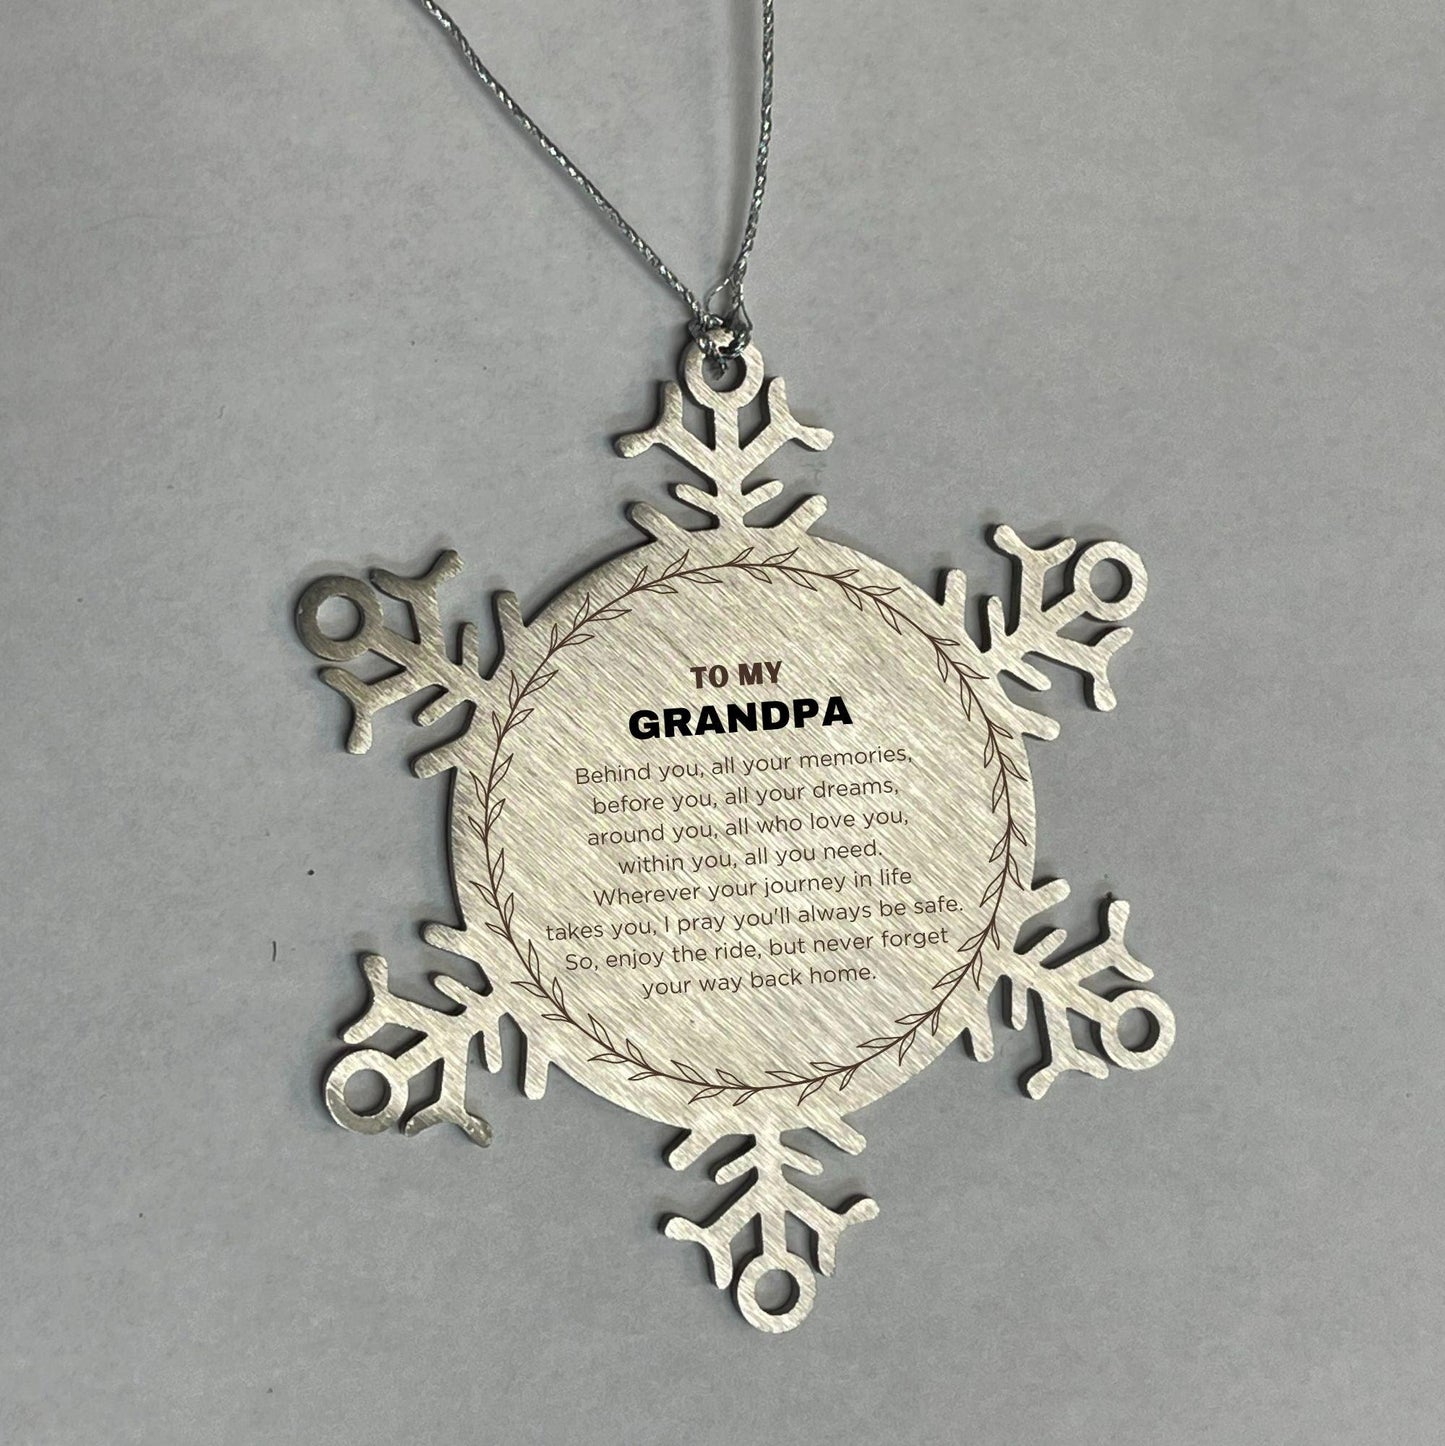 Inspirational Grandpa Snowflake Ornament - Behind you, all your Memories, Before you, all your Dreams - Birthday, Christmas Holiday Gifts - Mallard Moon Gift Shop